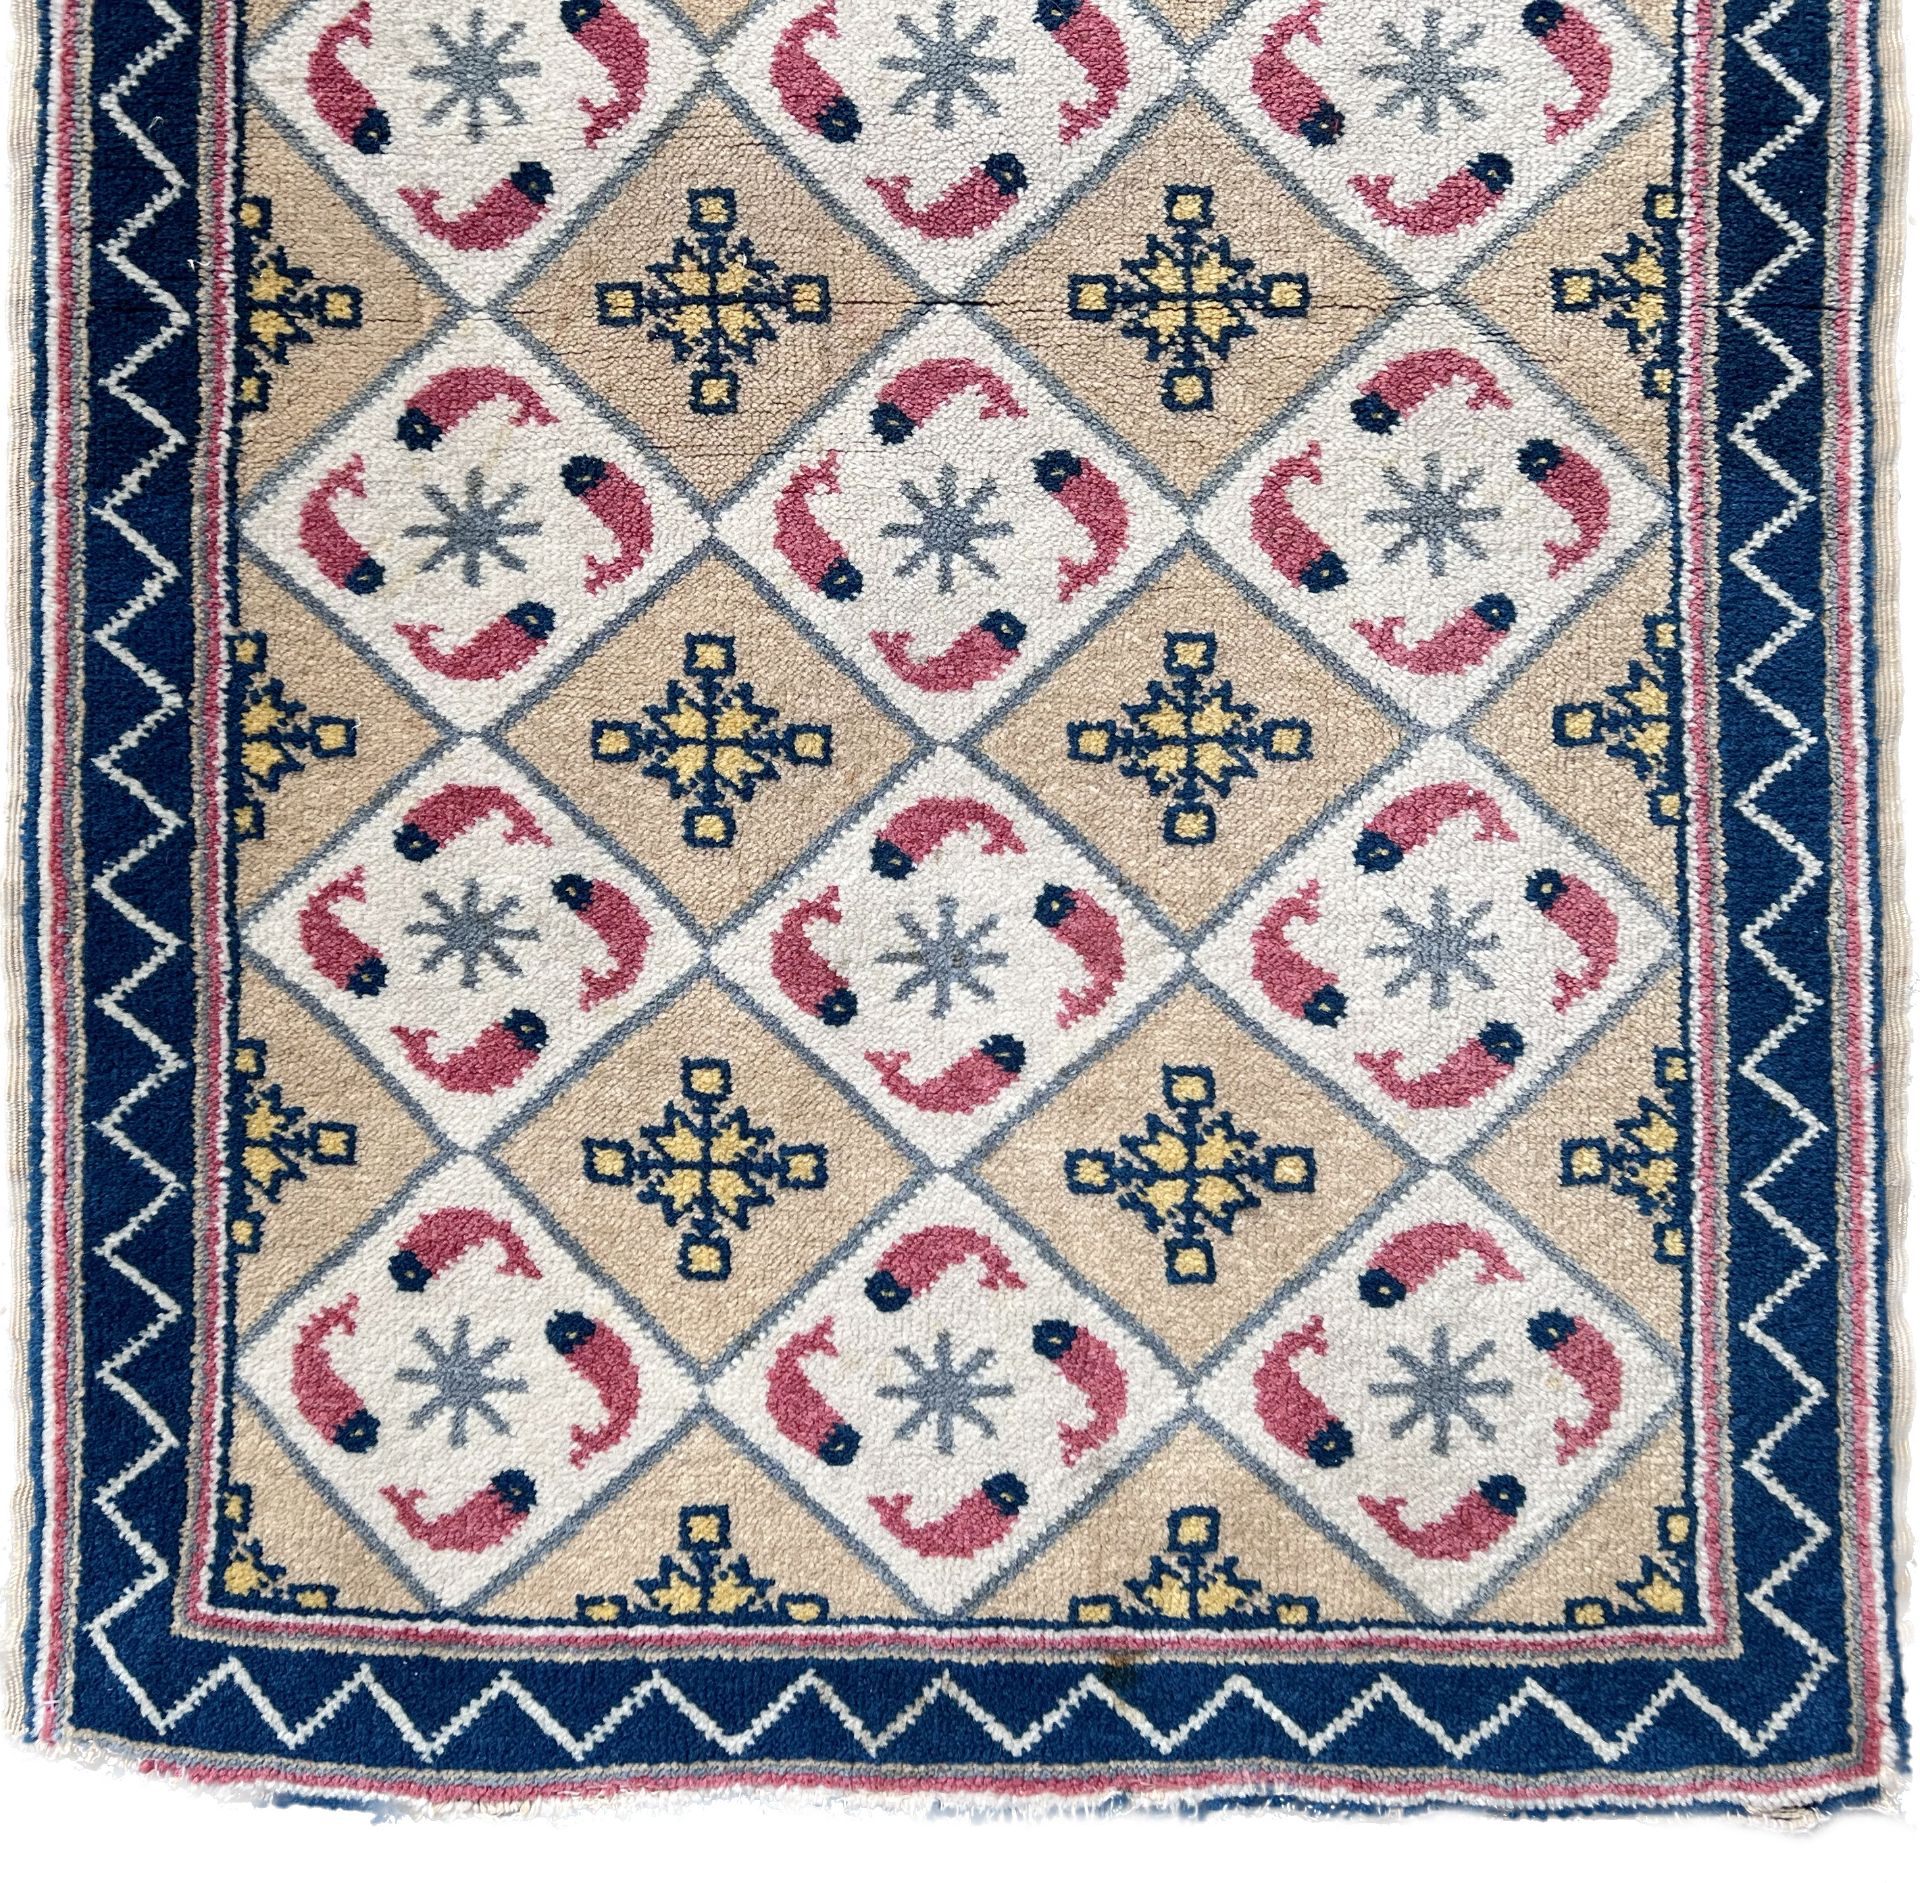 Fish country carpet. Pomerania. East Prussia. 1st half of the 20th century. - Image 3 of 5